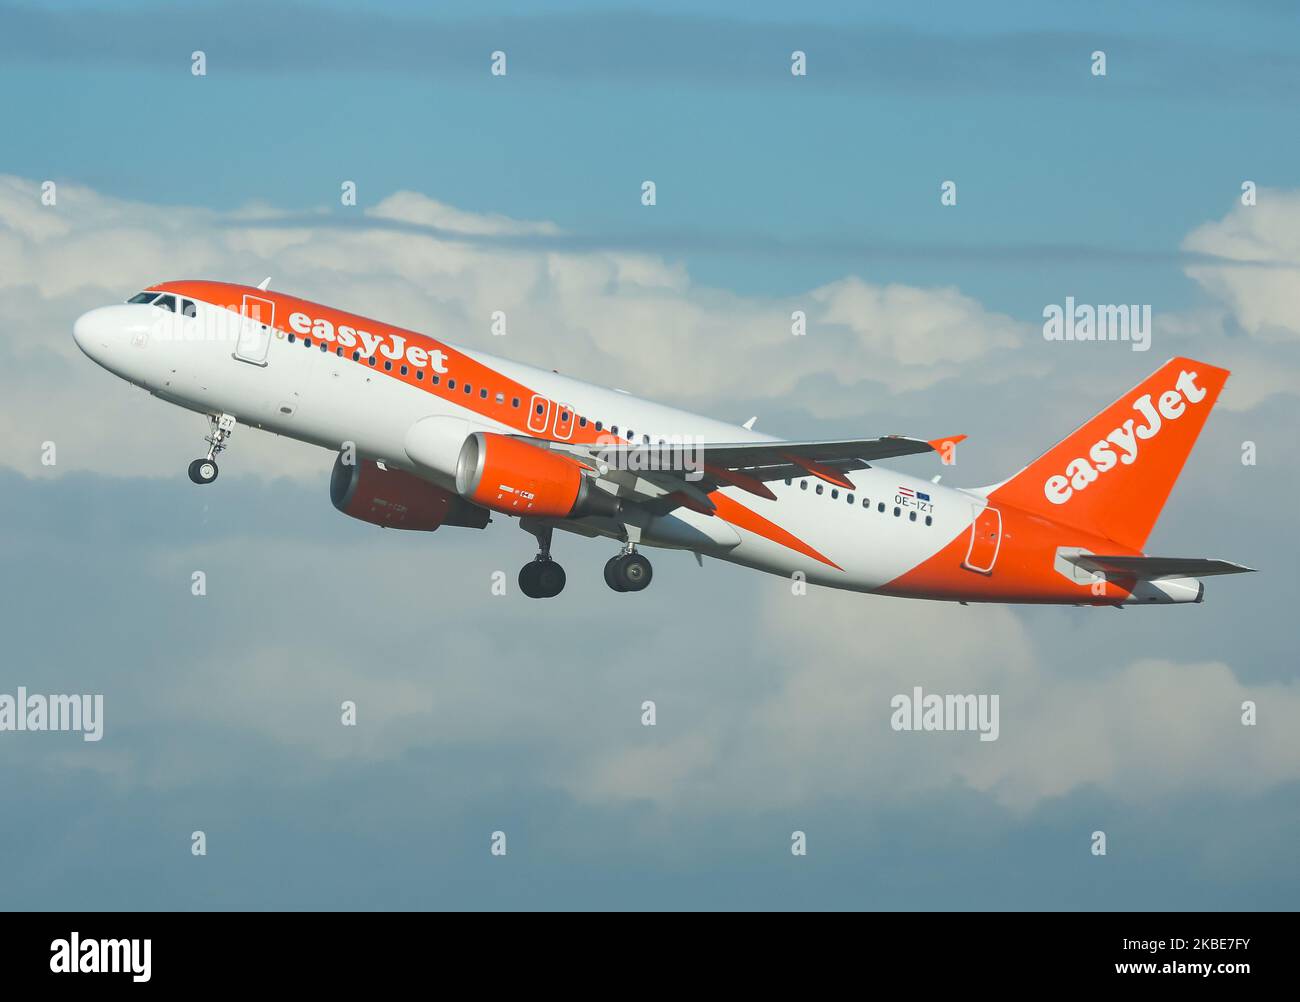 An EasyJet Europe Airline Airbus A320-200 narrow body commercial airplane as seen on rotation and take off from Brussels Internation Airport Zaventem BRU EBBR during a blue sky day on 11 January 2020in Brussels, Belgium. The aircraft has the registration OE-IZT with 2x CMFI jet engines. EasyJet Europe is an Austrian low-cost airline based in Vienna Austria subsidiary of the British low cost budget airline Easy Jet. The carrier connects the Belgian capital to Basel Mulhouse, Geneva, Berlin Tegel, Bordeaux and Nice. (Photo by Nicolas Economou/NurPhoto) Stock Photo